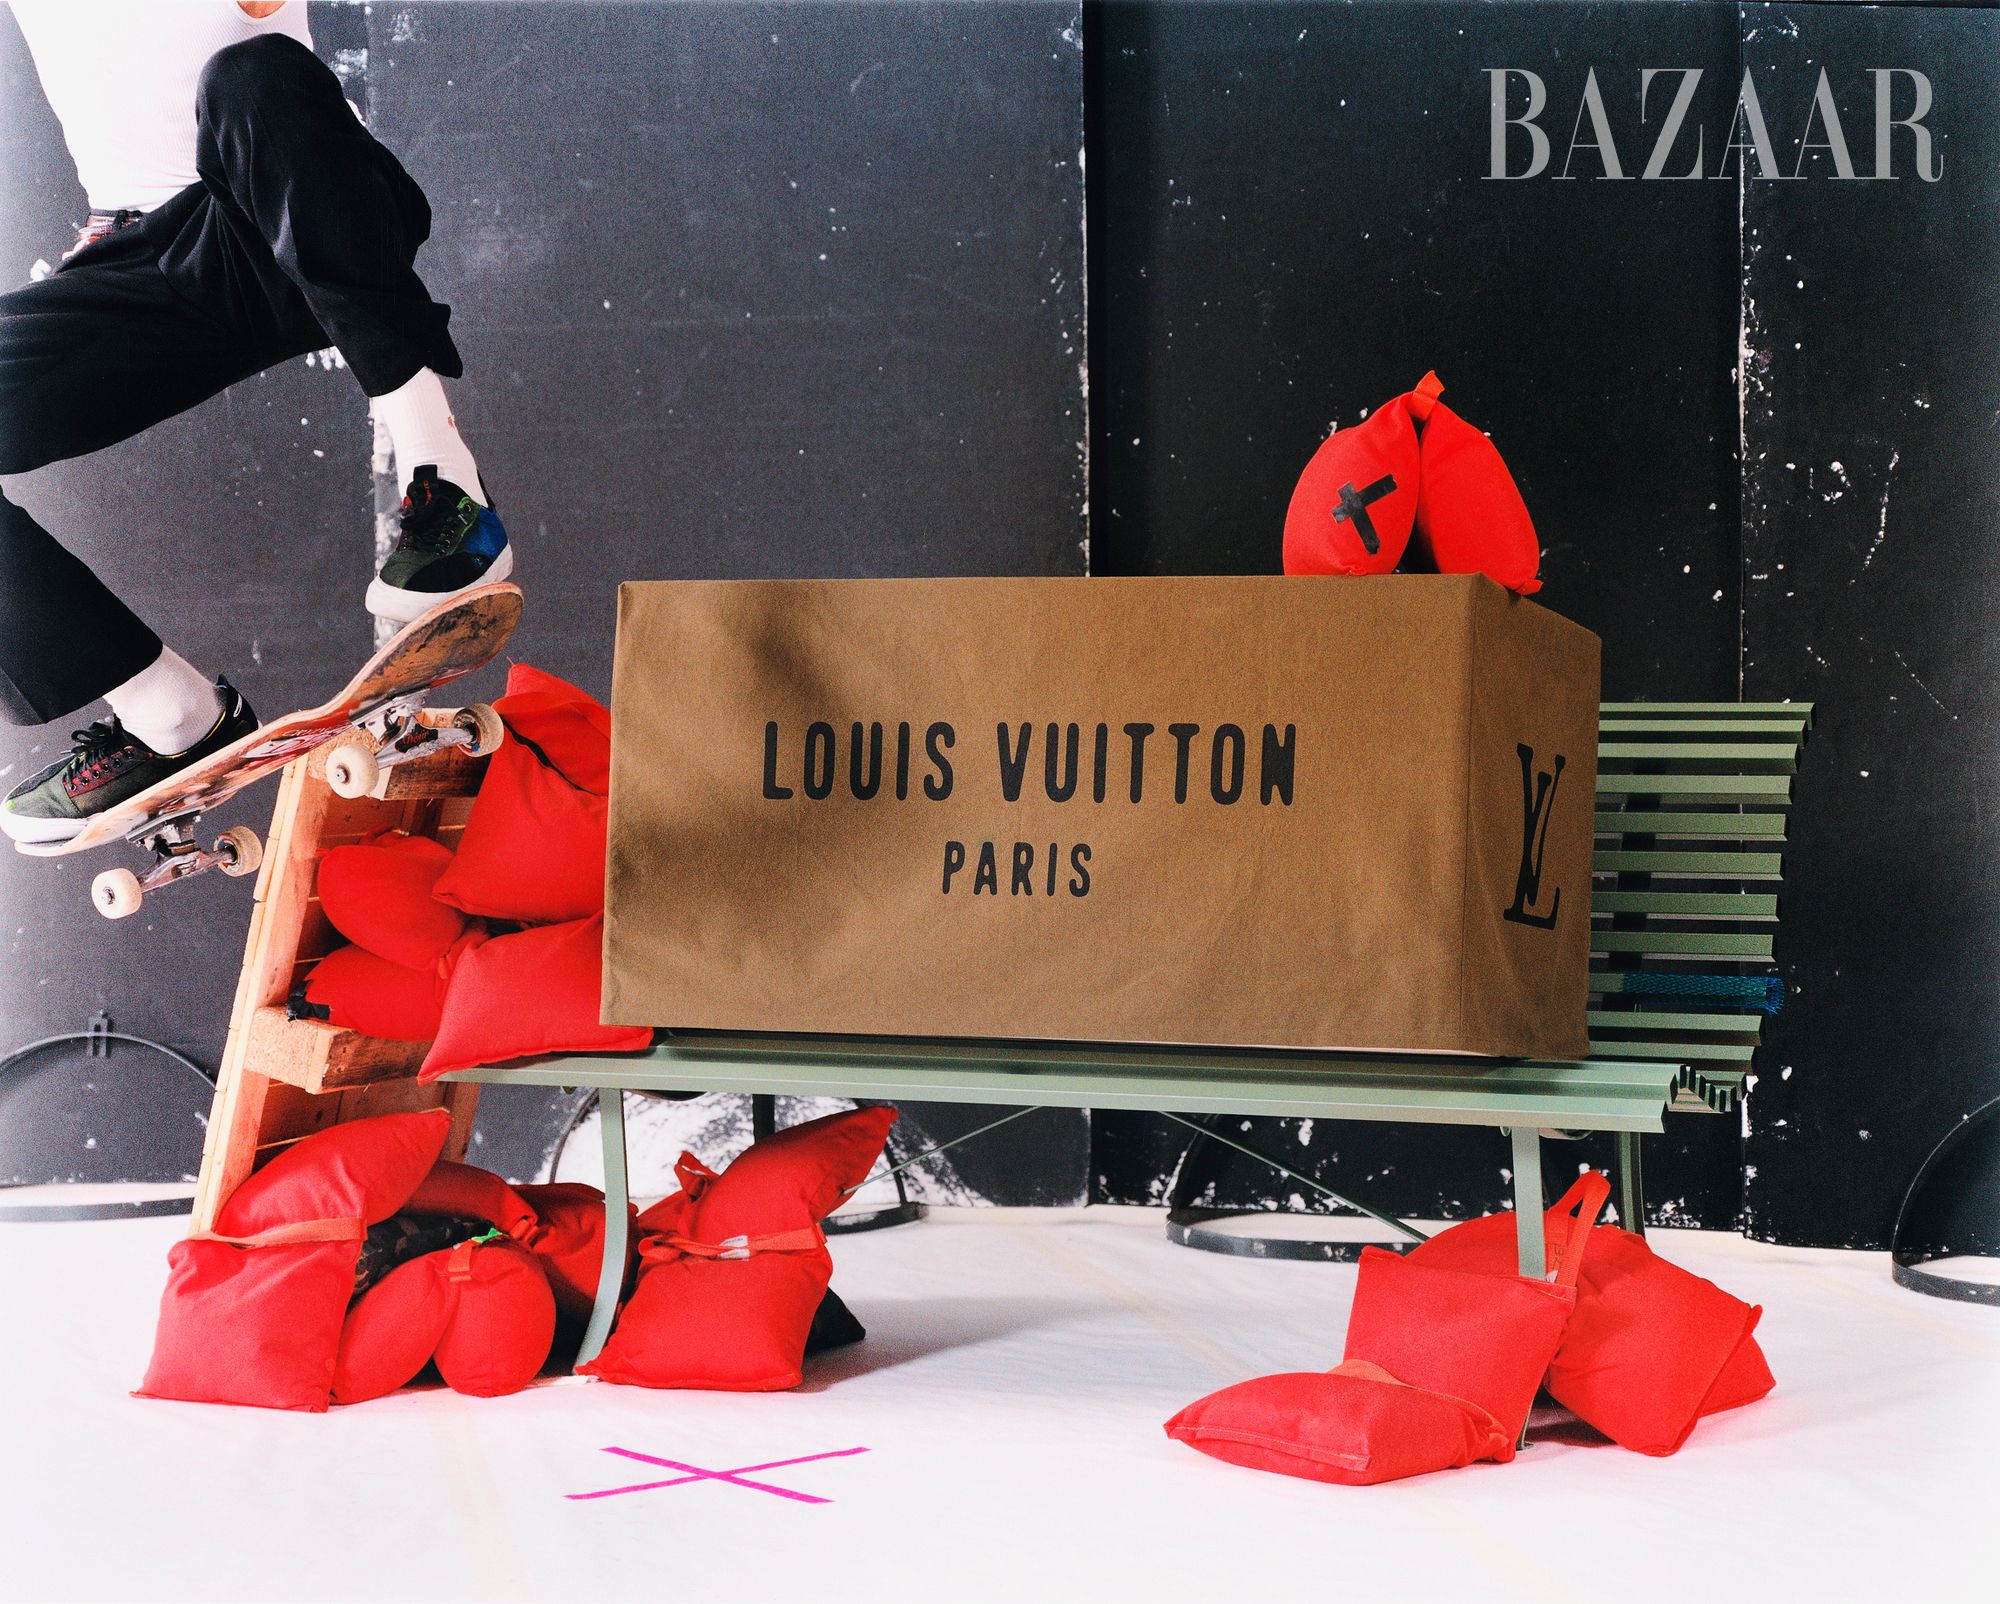 louis vuitton box on a green bench with skateboarder riding on the edge of the bench